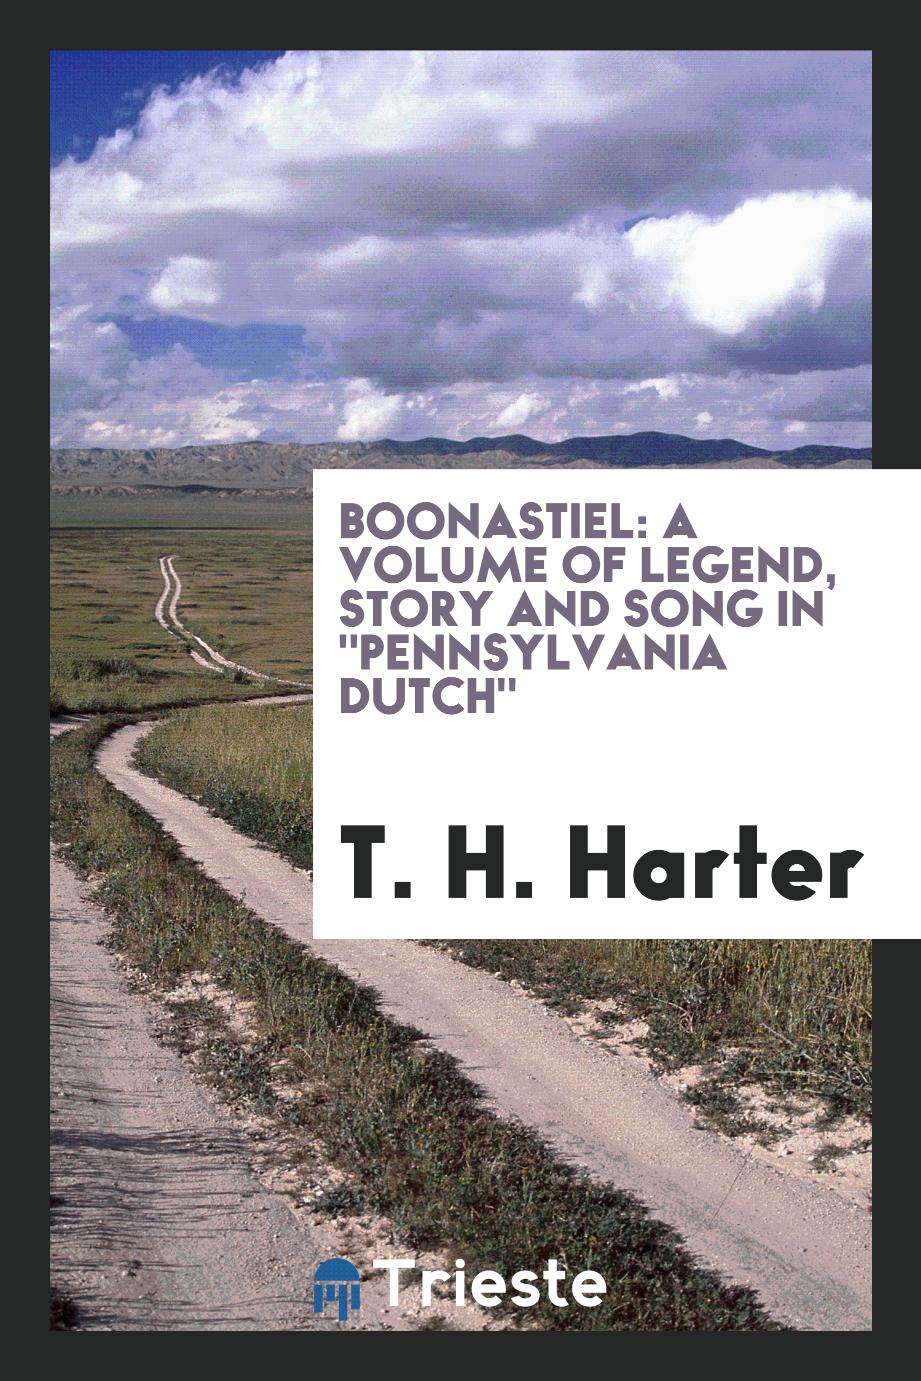 Boonastiel: a volume of legend, story and song in "Pennsylvania Dutch"